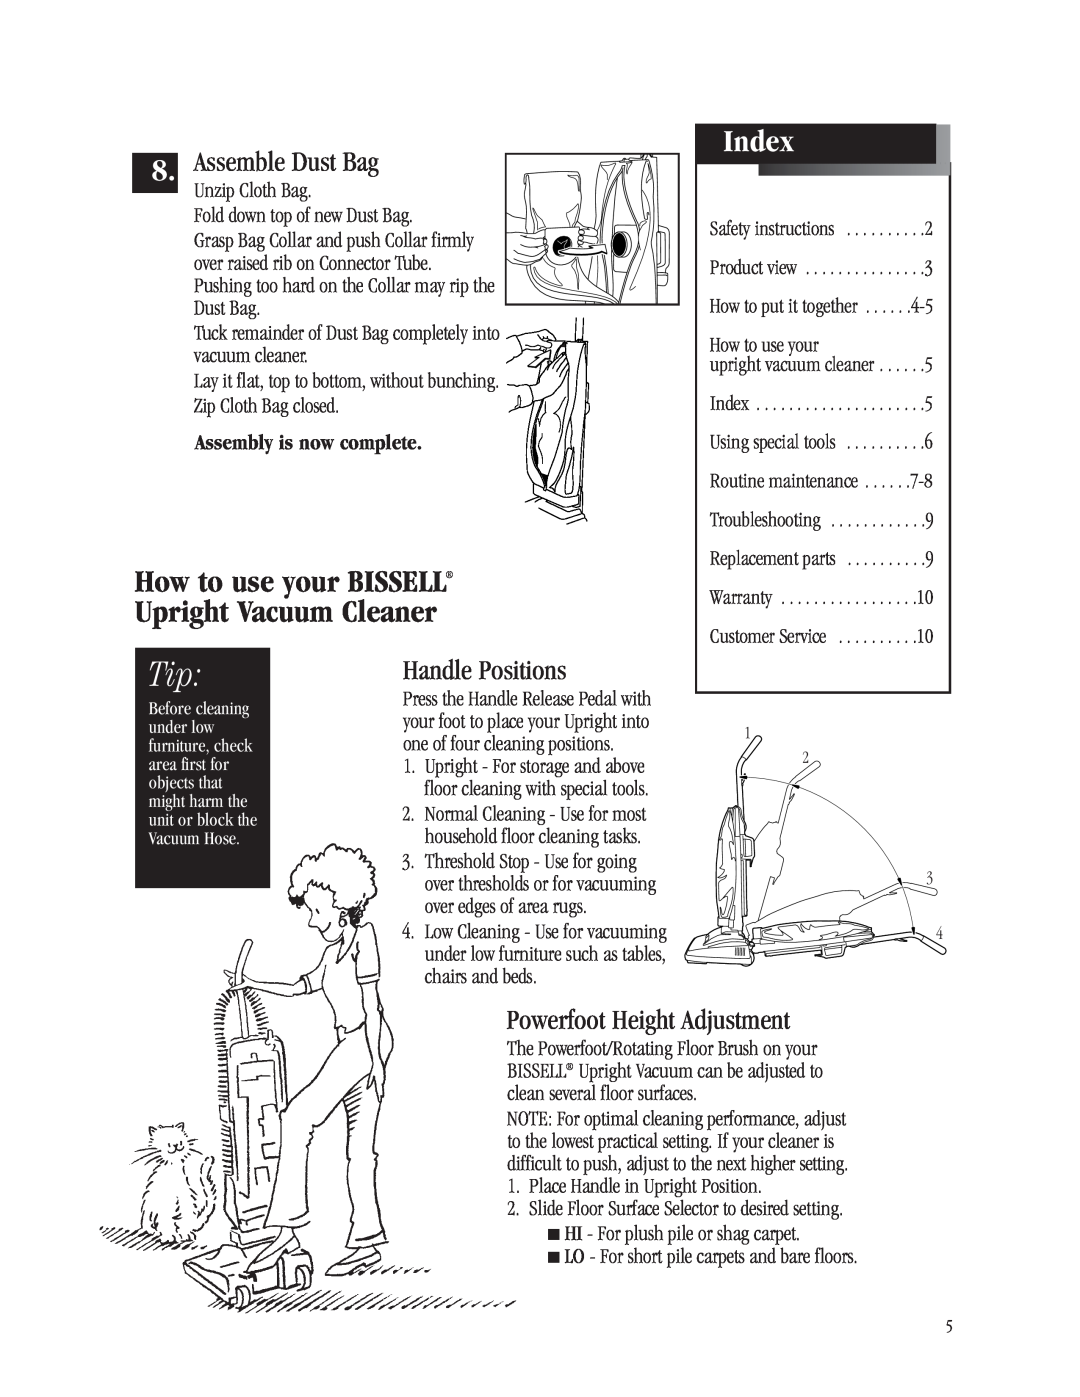 Bissell 3512-5 warranty How to use your BISSELL Upright Vacuum Cleaner, Index, Assemble Dust Bag, Handle Positions 